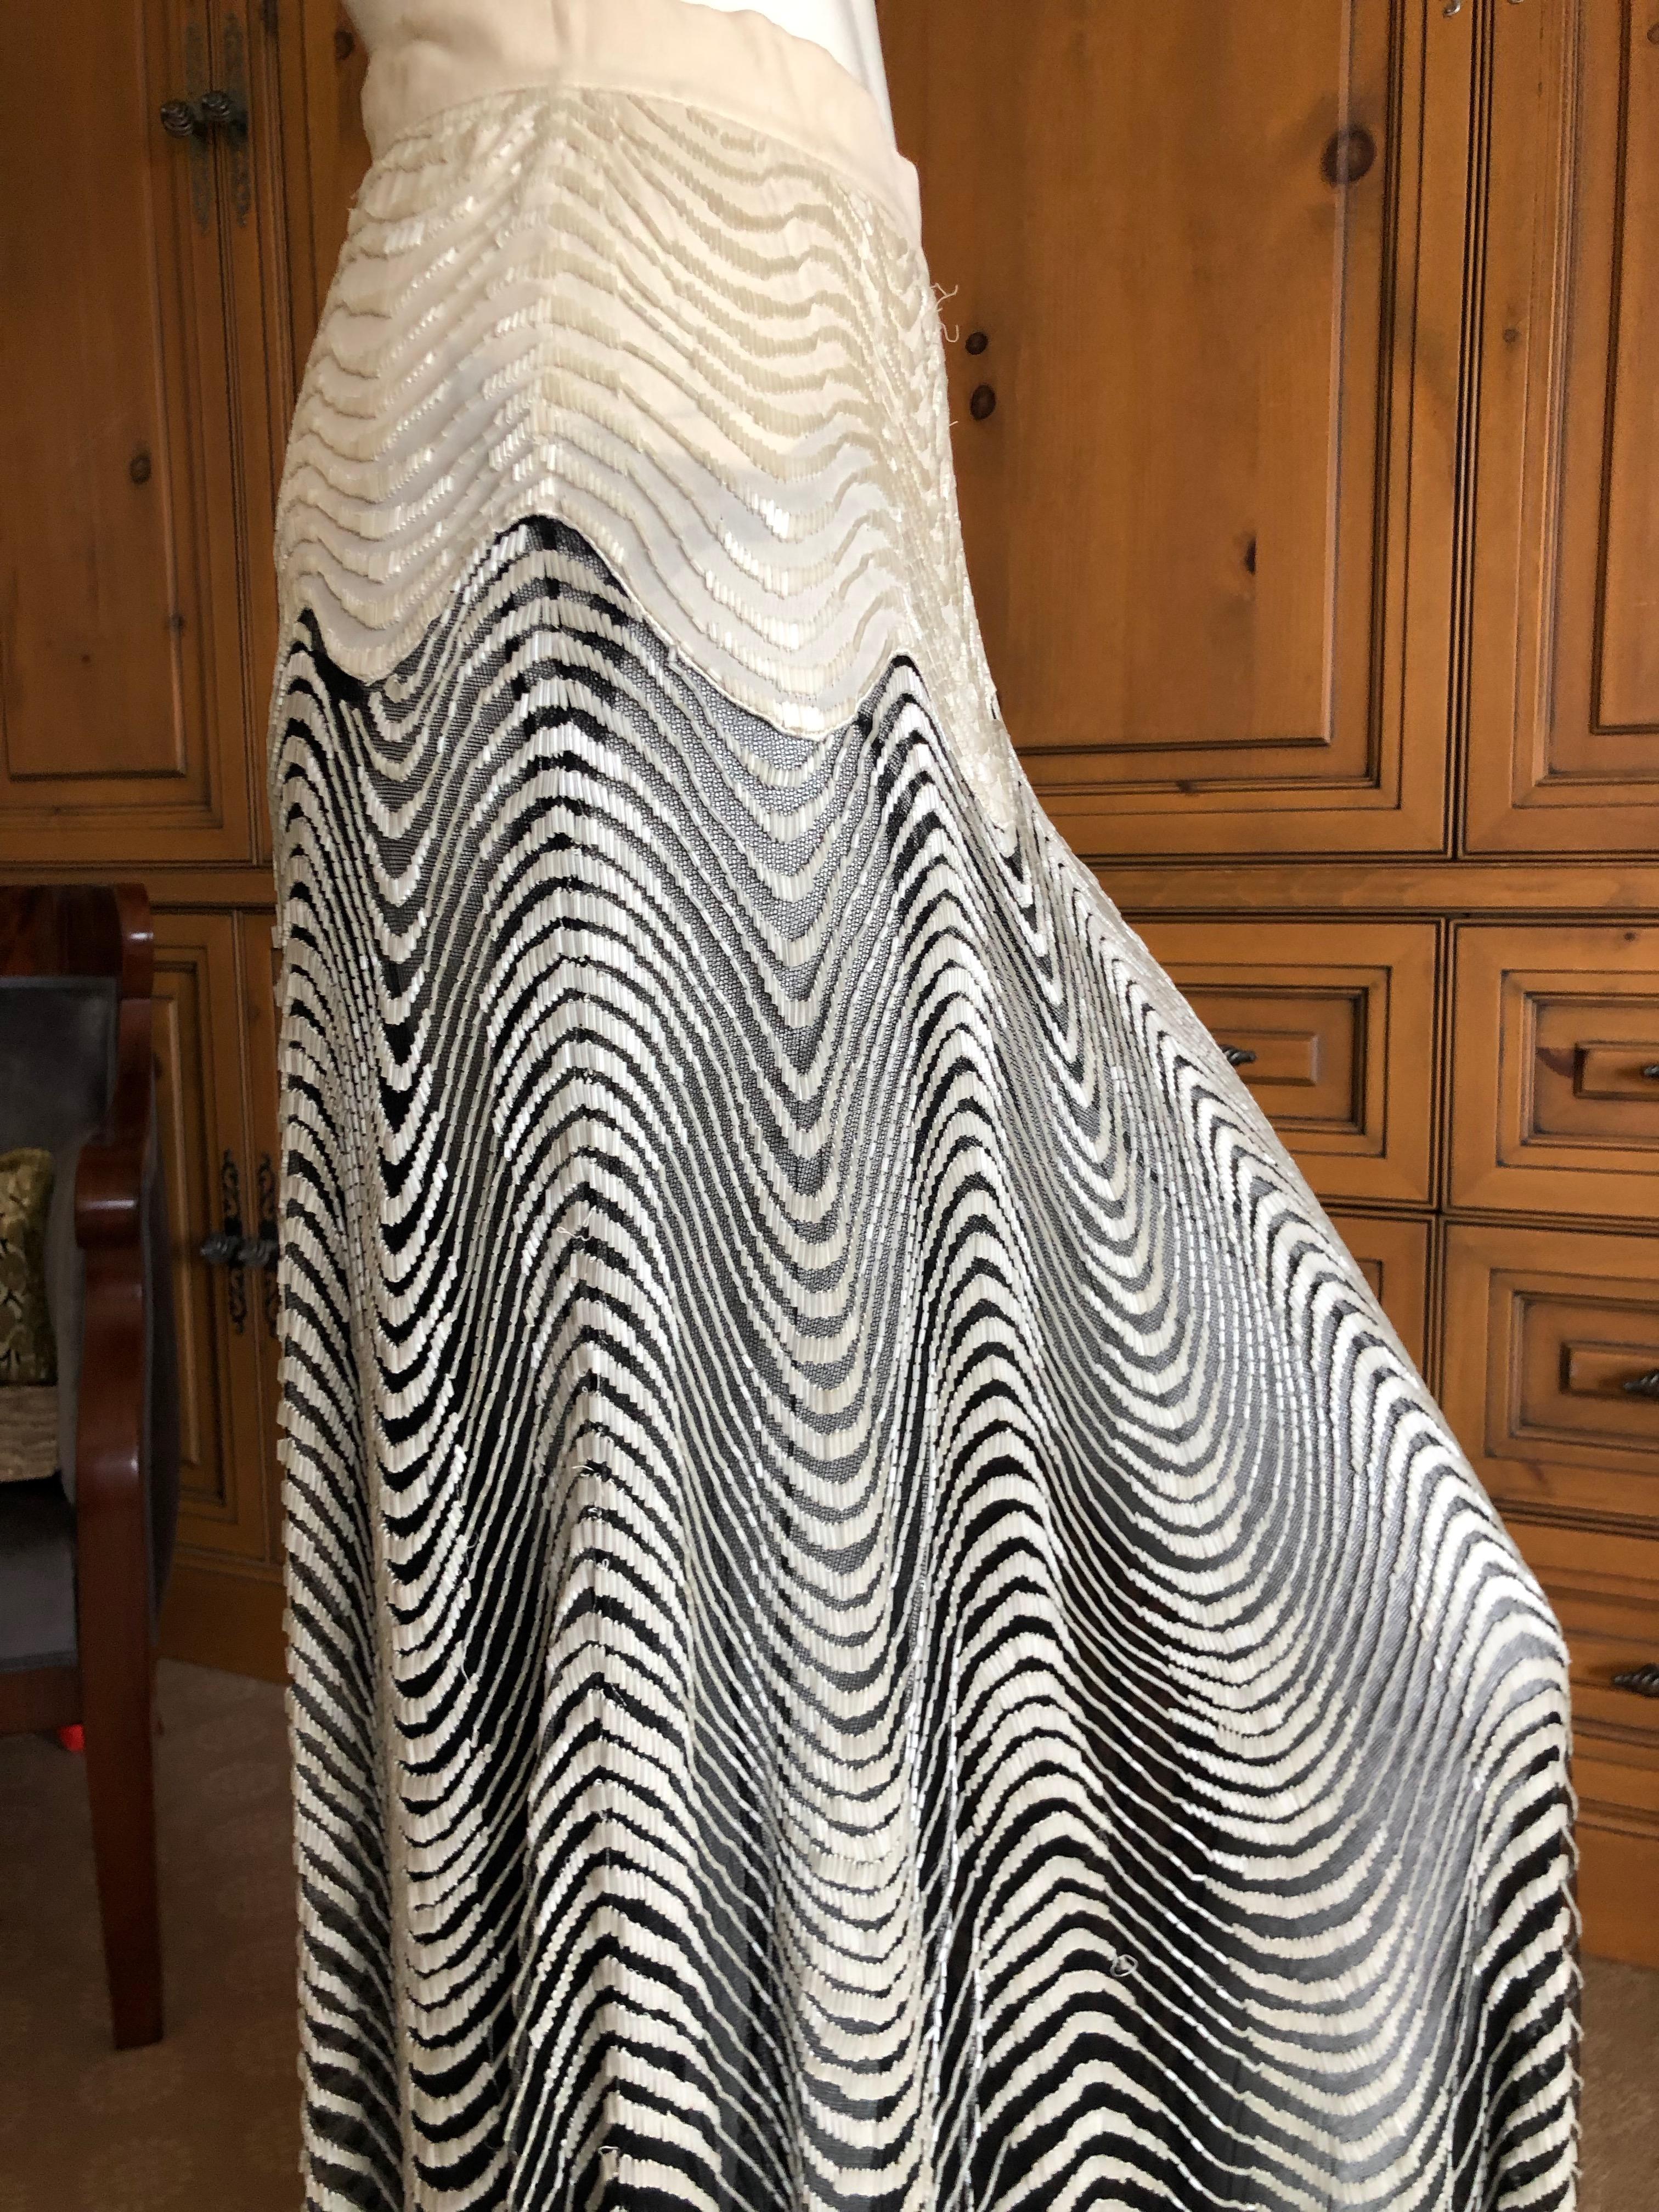 Roberto Cavalli Vintage Sheer Ball Skirt with Glass Bugle Bead Op Art Pattern  In Excellent Condition For Sale In Cloverdale, CA